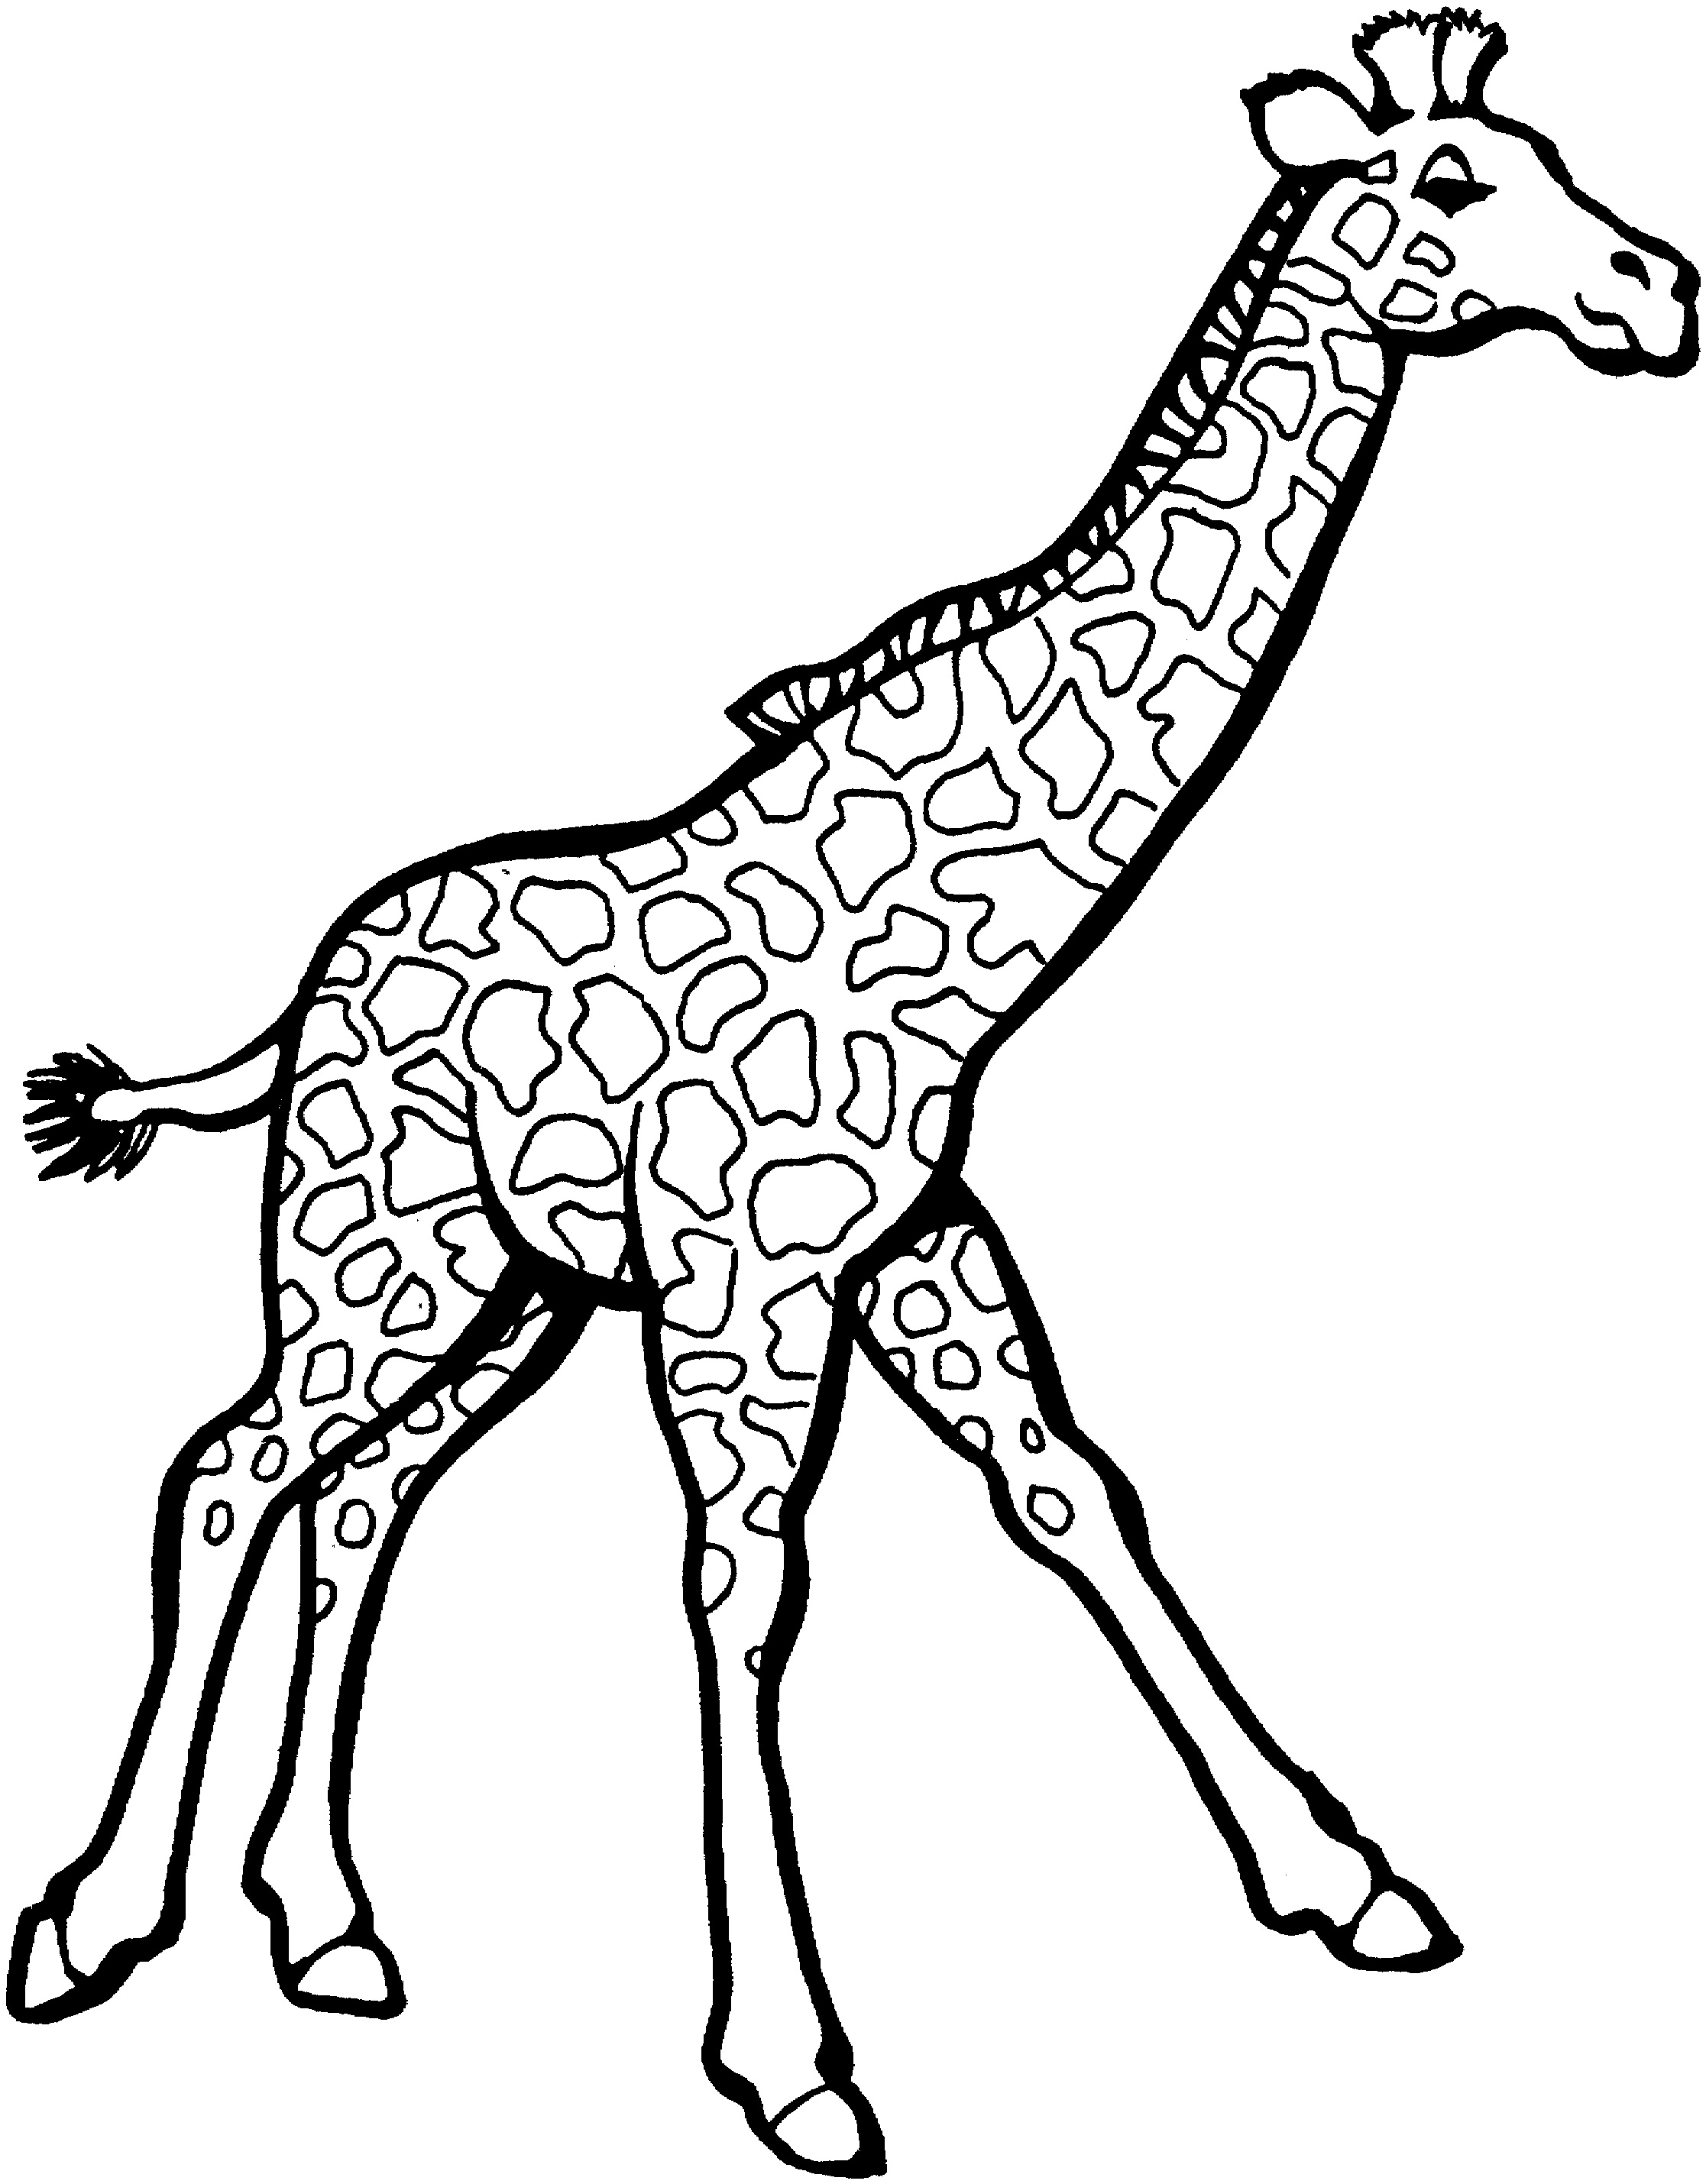 Coloring Pages of Giraffe Coloring Page